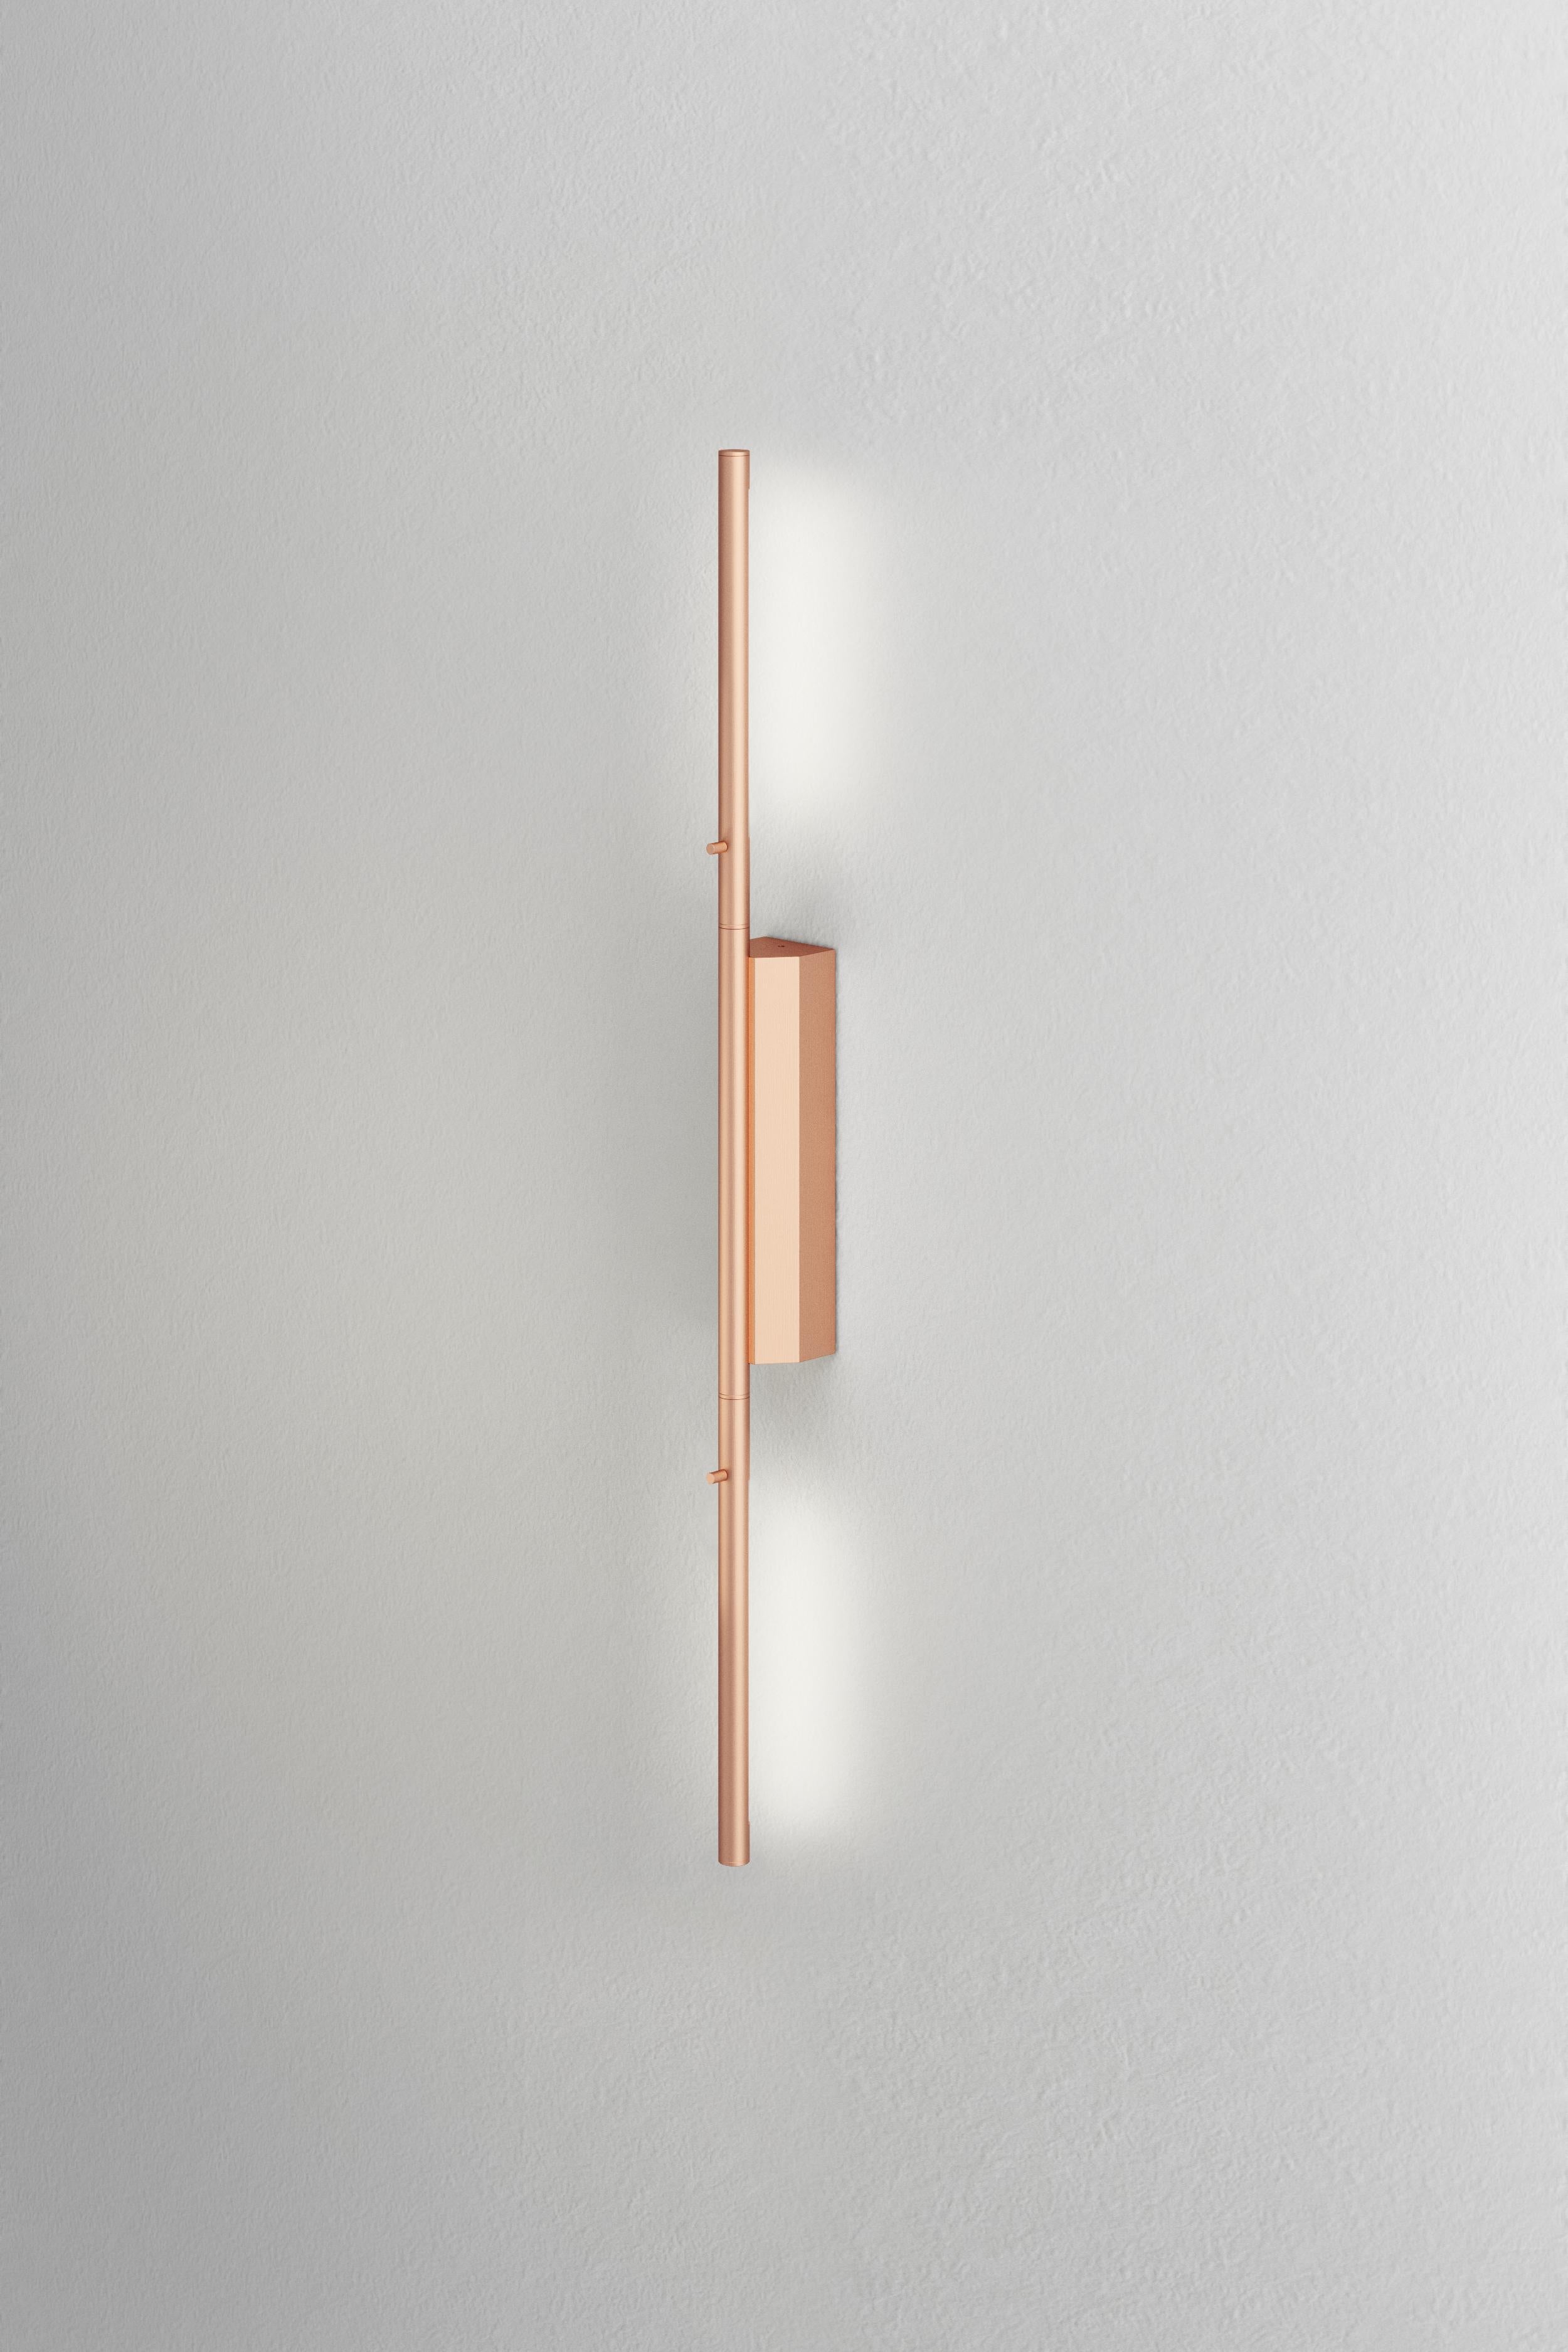 IP link double 610 satin graphite wall light by Emilie Cathelineau
Dimensions: D 4.5 x W 5 X H 61 cm
Materials: solid brass, satin copper, led, polycarbonate.
Others finishes and dimensions are available.

All our lamps can be wired according